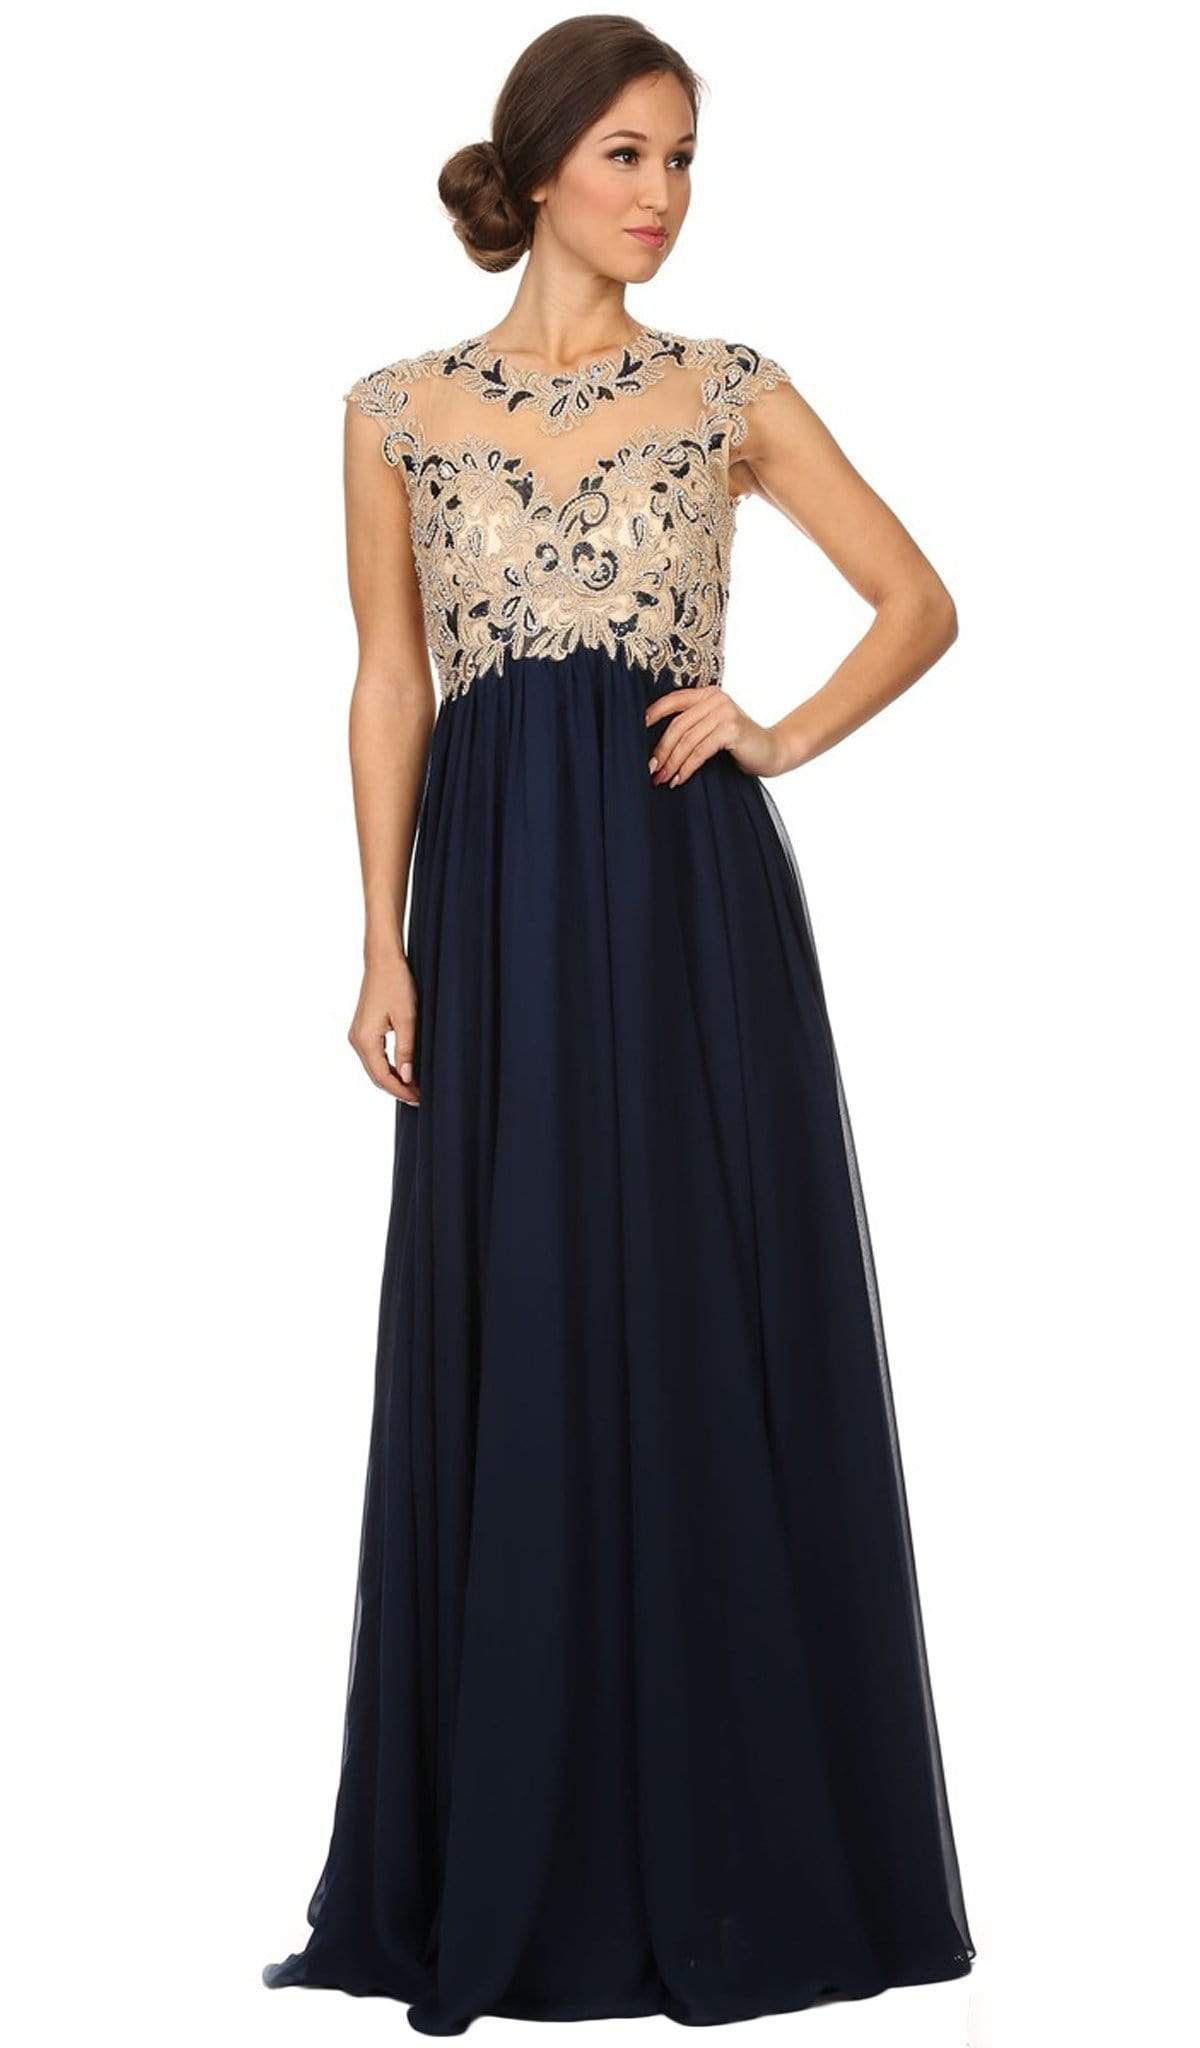 Image of Eureka Fashion - Cap Sleeve Illusion Beaded Lace A-Line Evening Gown